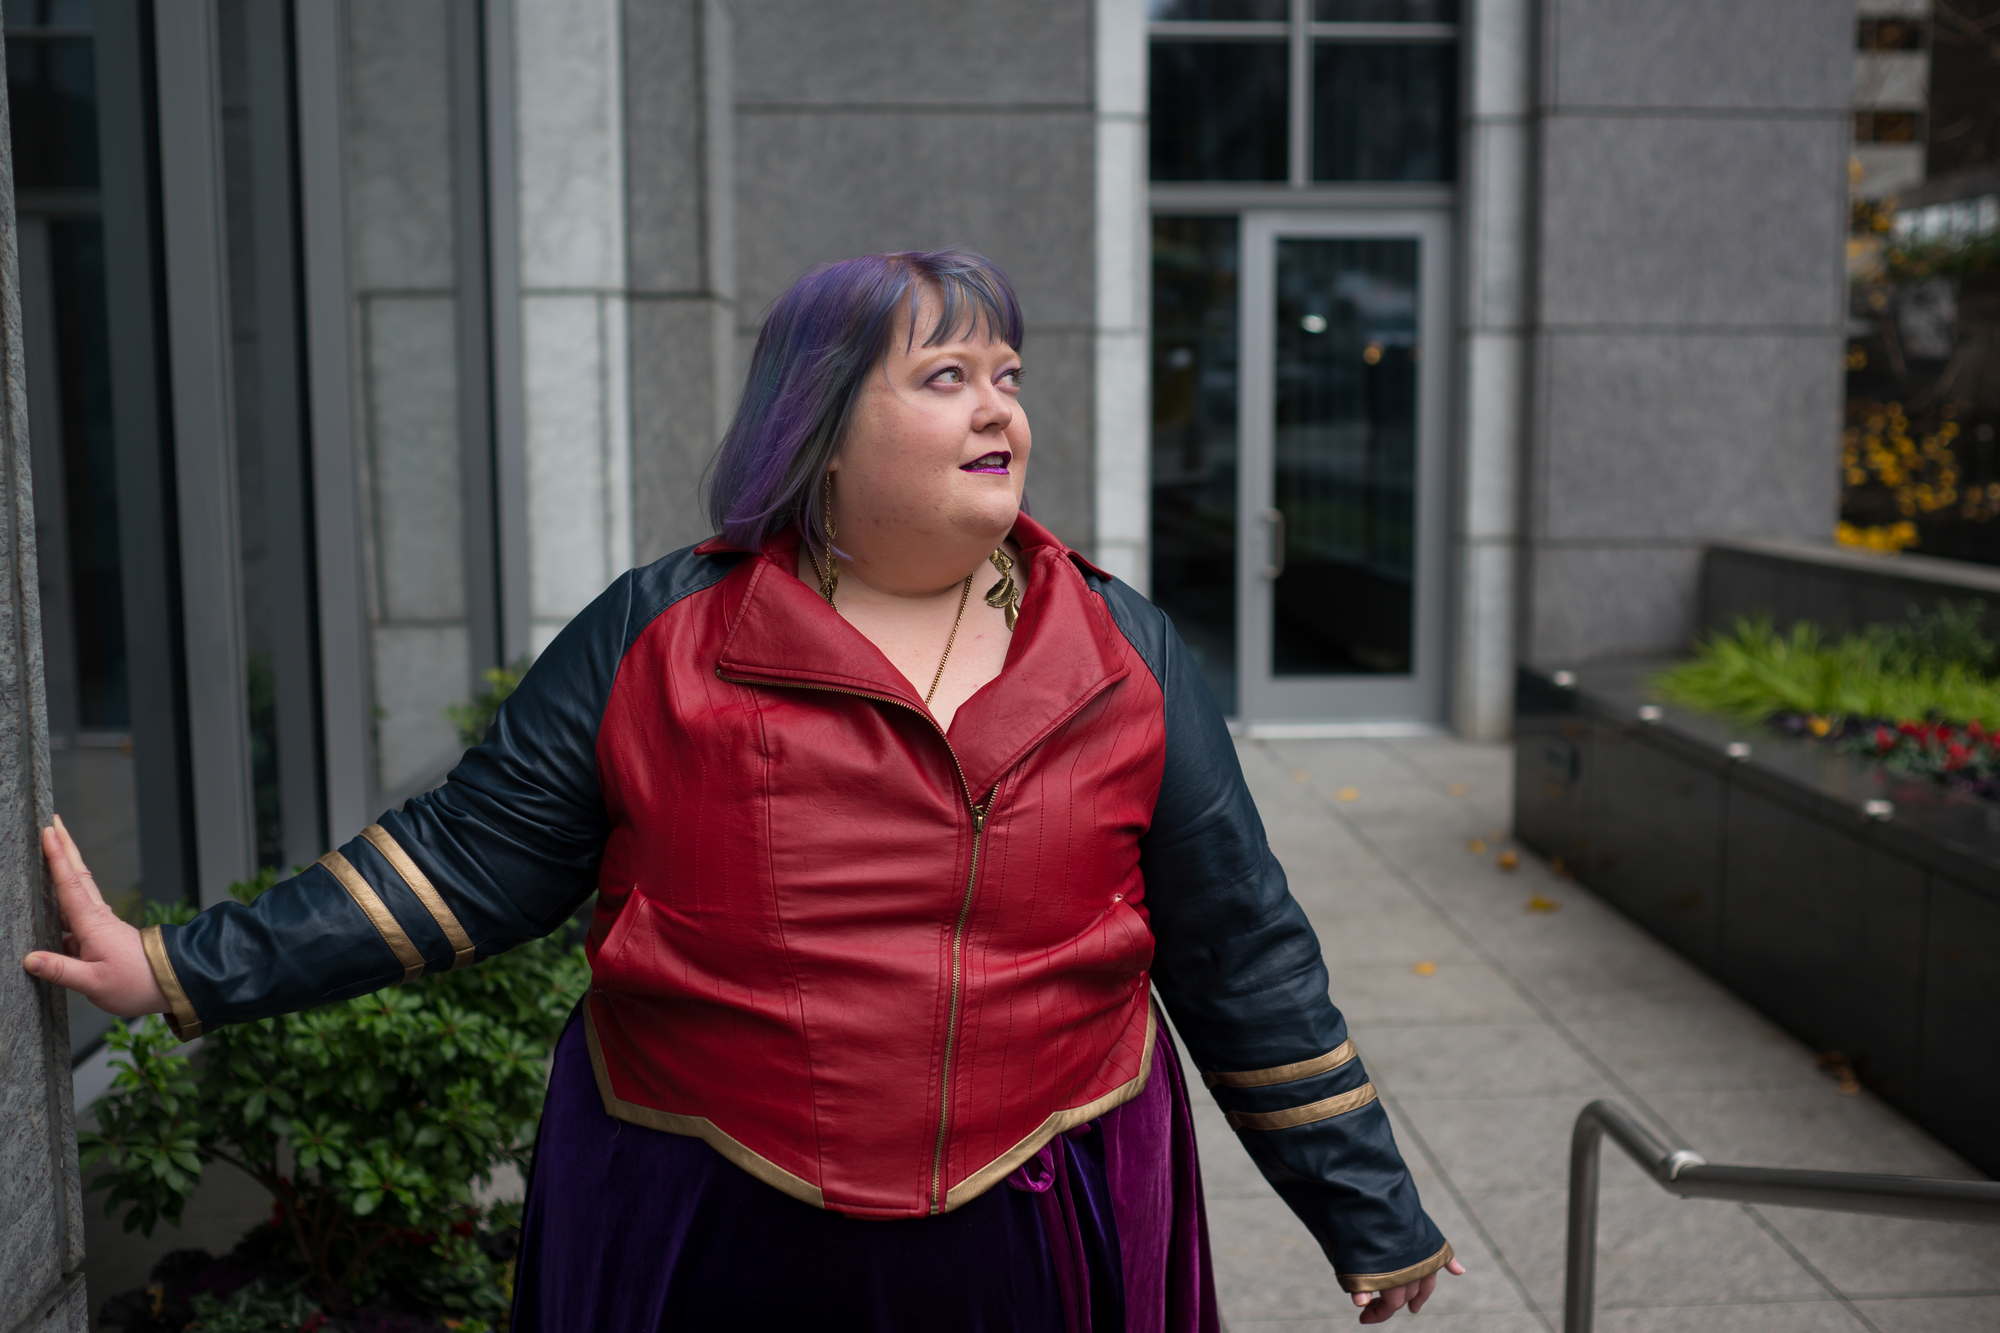 A fat woman with purple hair gazes wistfully off to the side